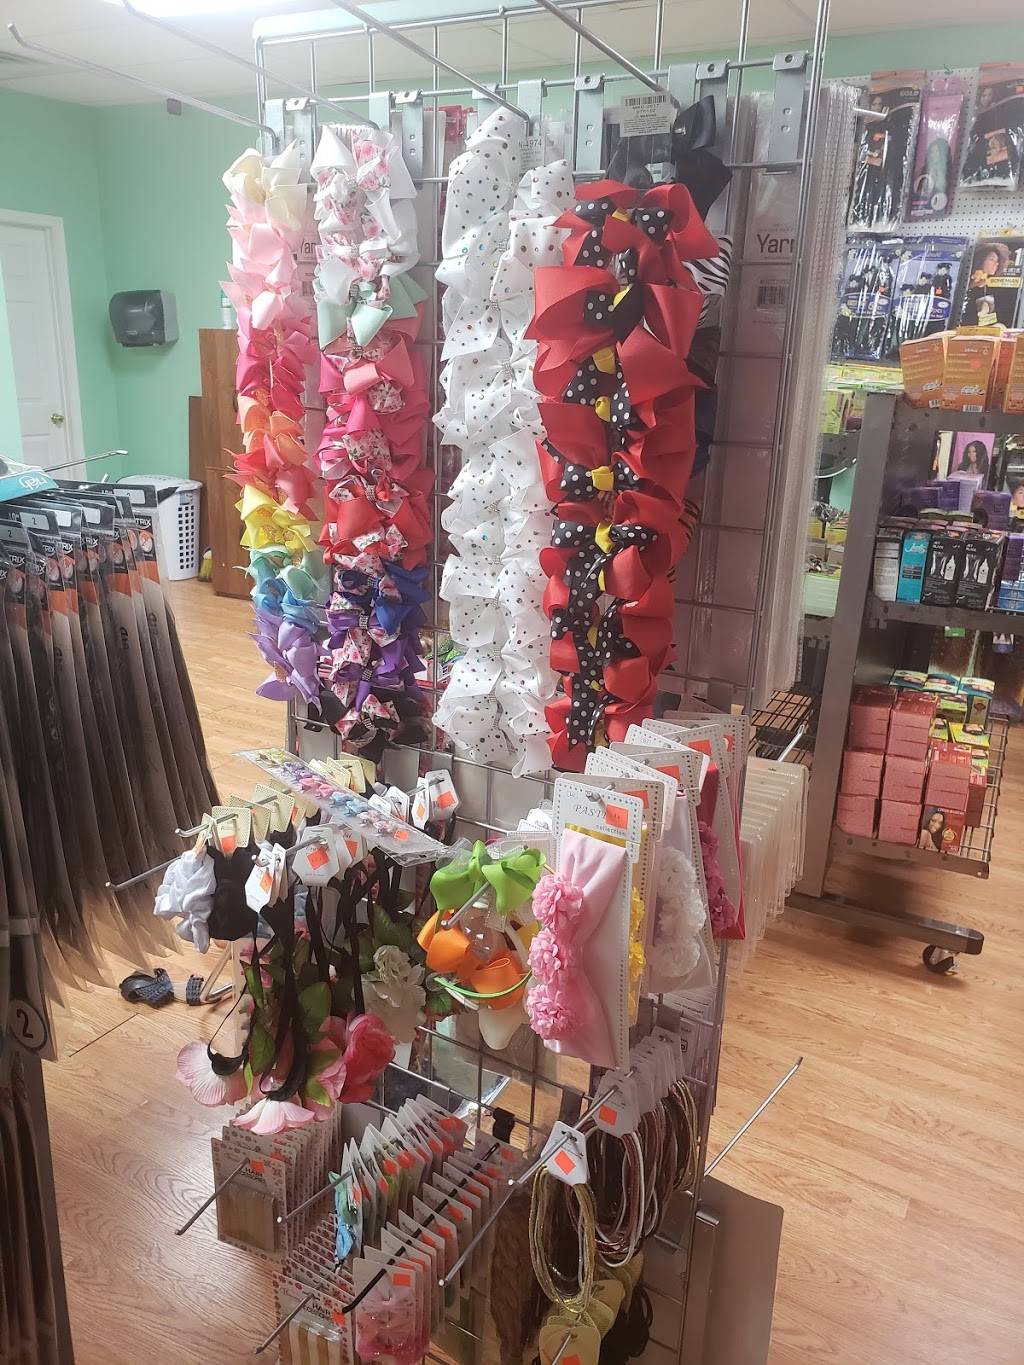 Ld beauty supply &braiding LLC | 7490 Madison Ave, Indianapolis, IN 46227 | Phone: (317) 909-1297